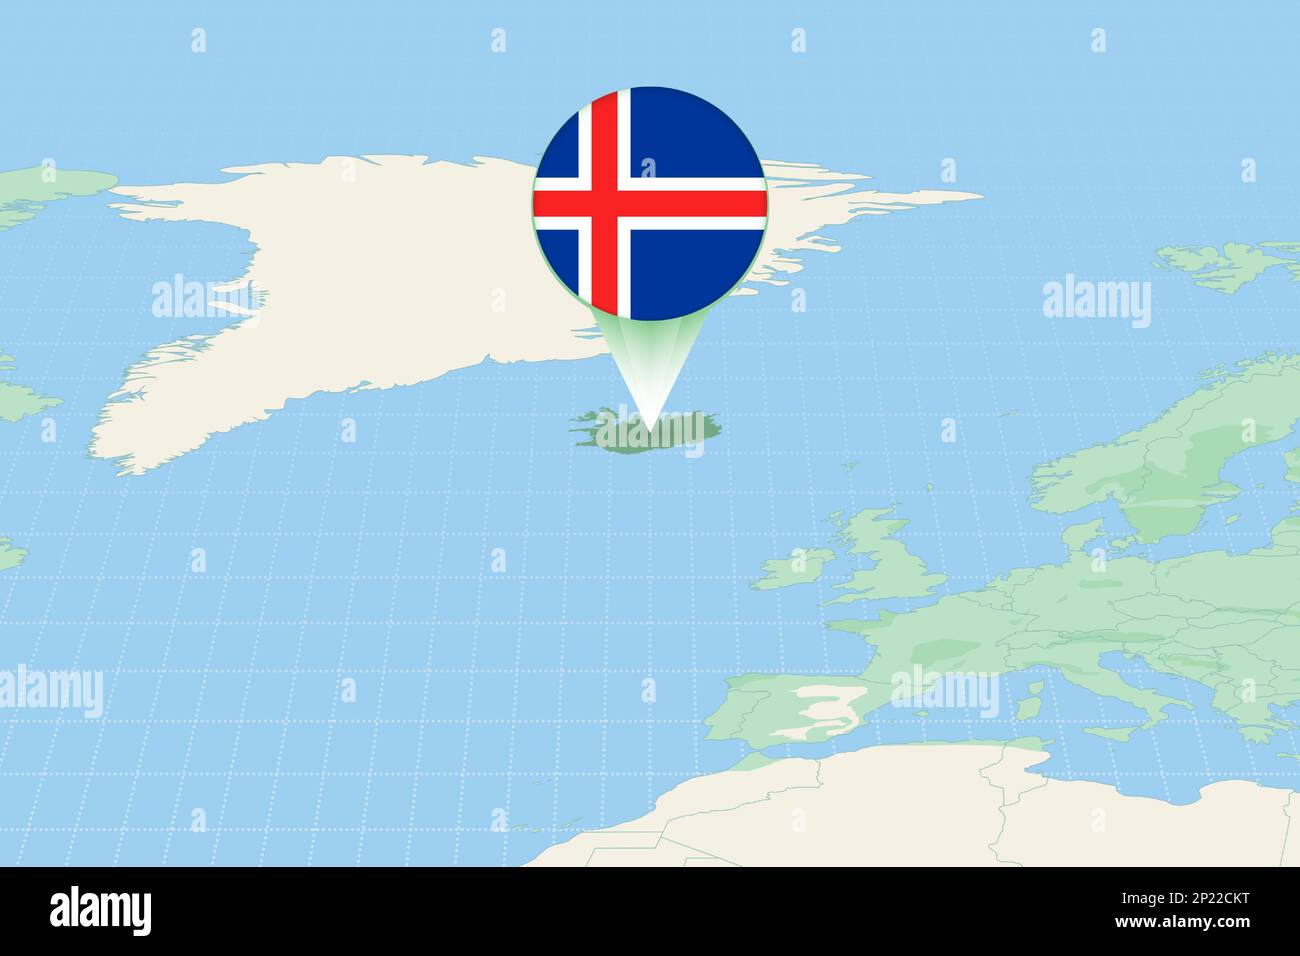 Map illustration of Iceland with the flag. Cartographic illustration of Iceland and neighboring countries. Vector map and flag. Stock Vector